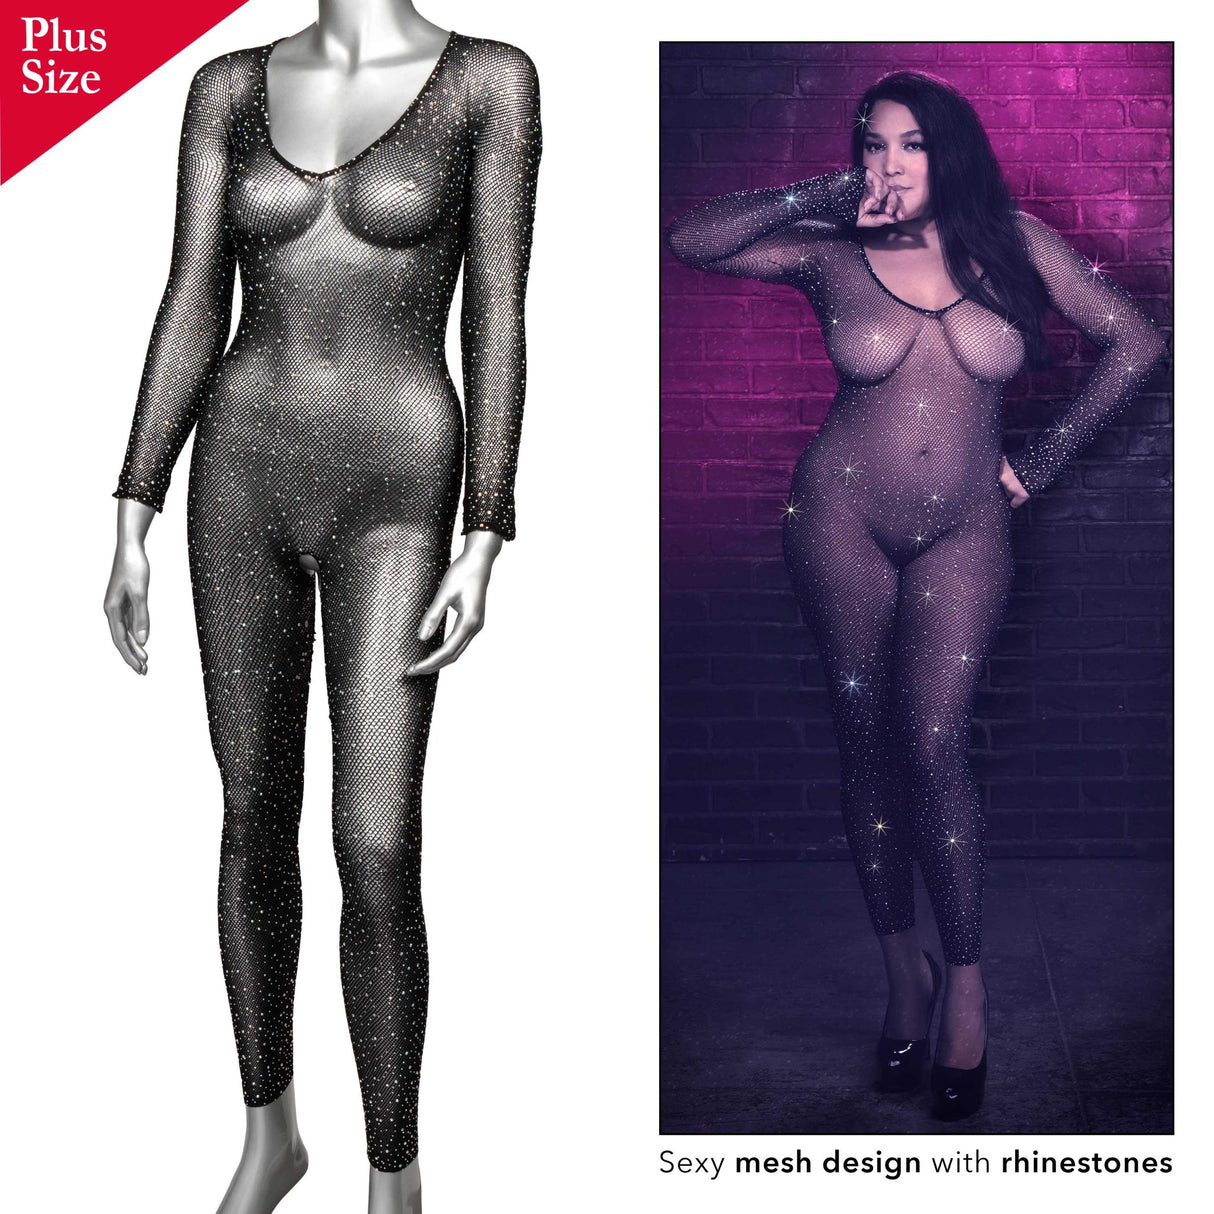 Radiance Crotchless Full Body Suit